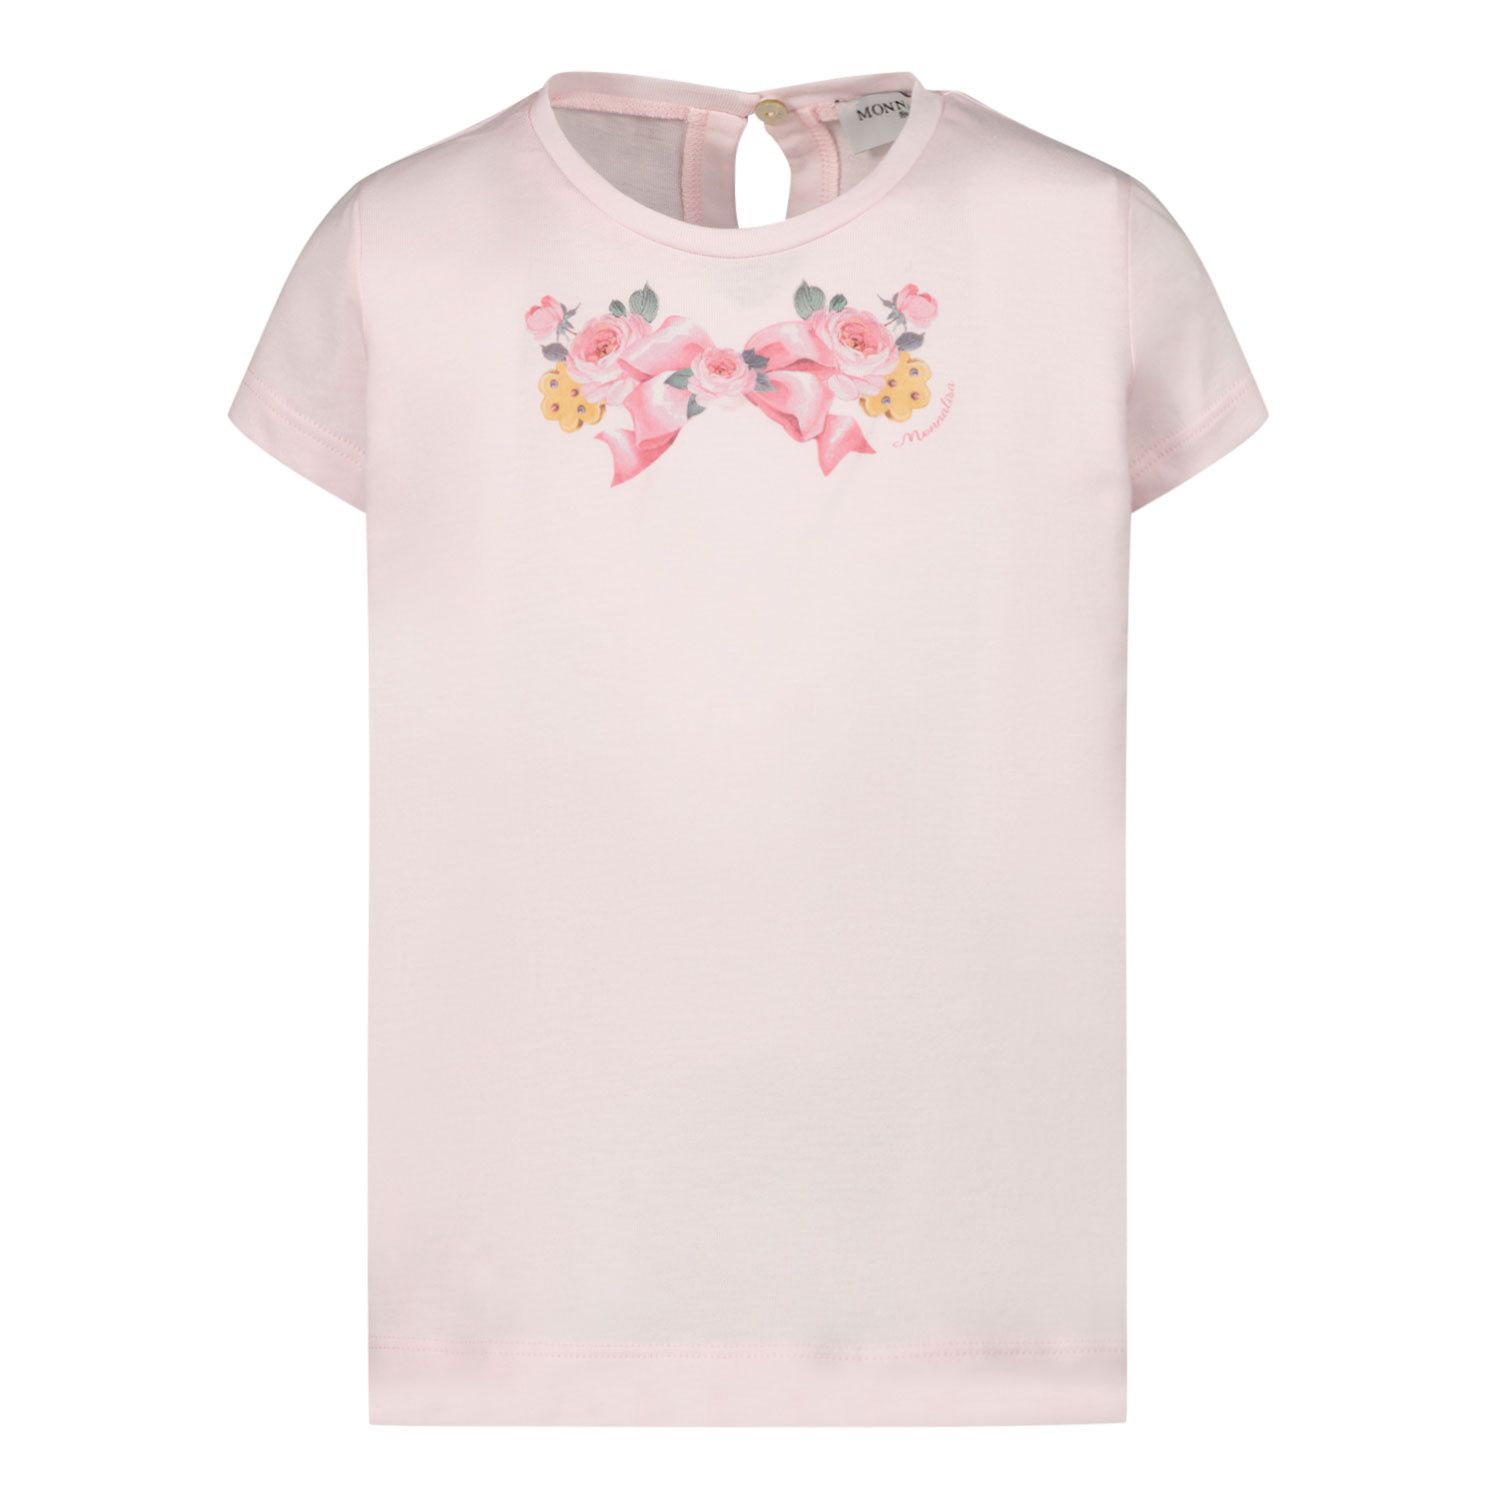 Picture of MonnaLisa 398602S6 baby shirt light pink